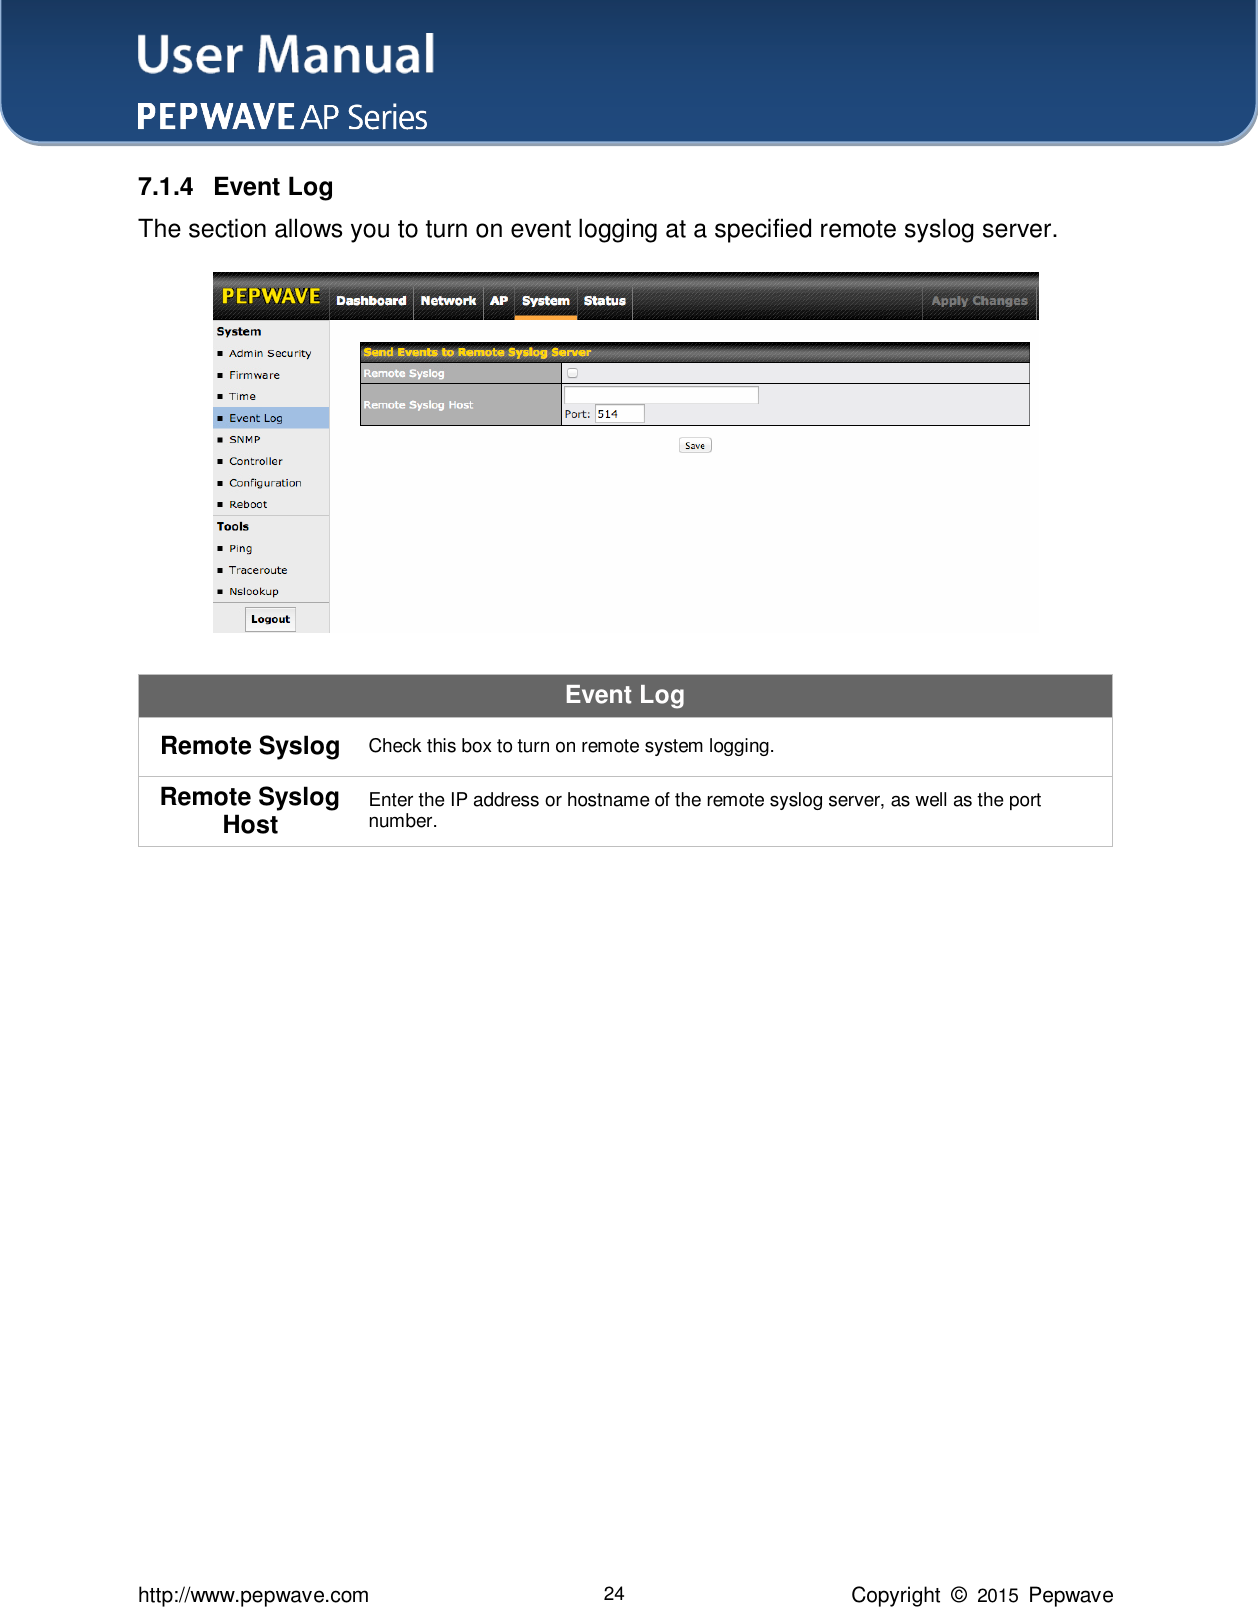 User Manual    http://www.pepwave.com 24 Copyright  ©  2015  Pepwave 7.1.4  Event Log The section allows you to turn on event logging at a specified remote syslog server.  Event Log Remote Syslog Check this box to turn on remote system logging. Remote Syslog Host Enter the IP address or hostname of the remote syslog server, as well as the port number.                 